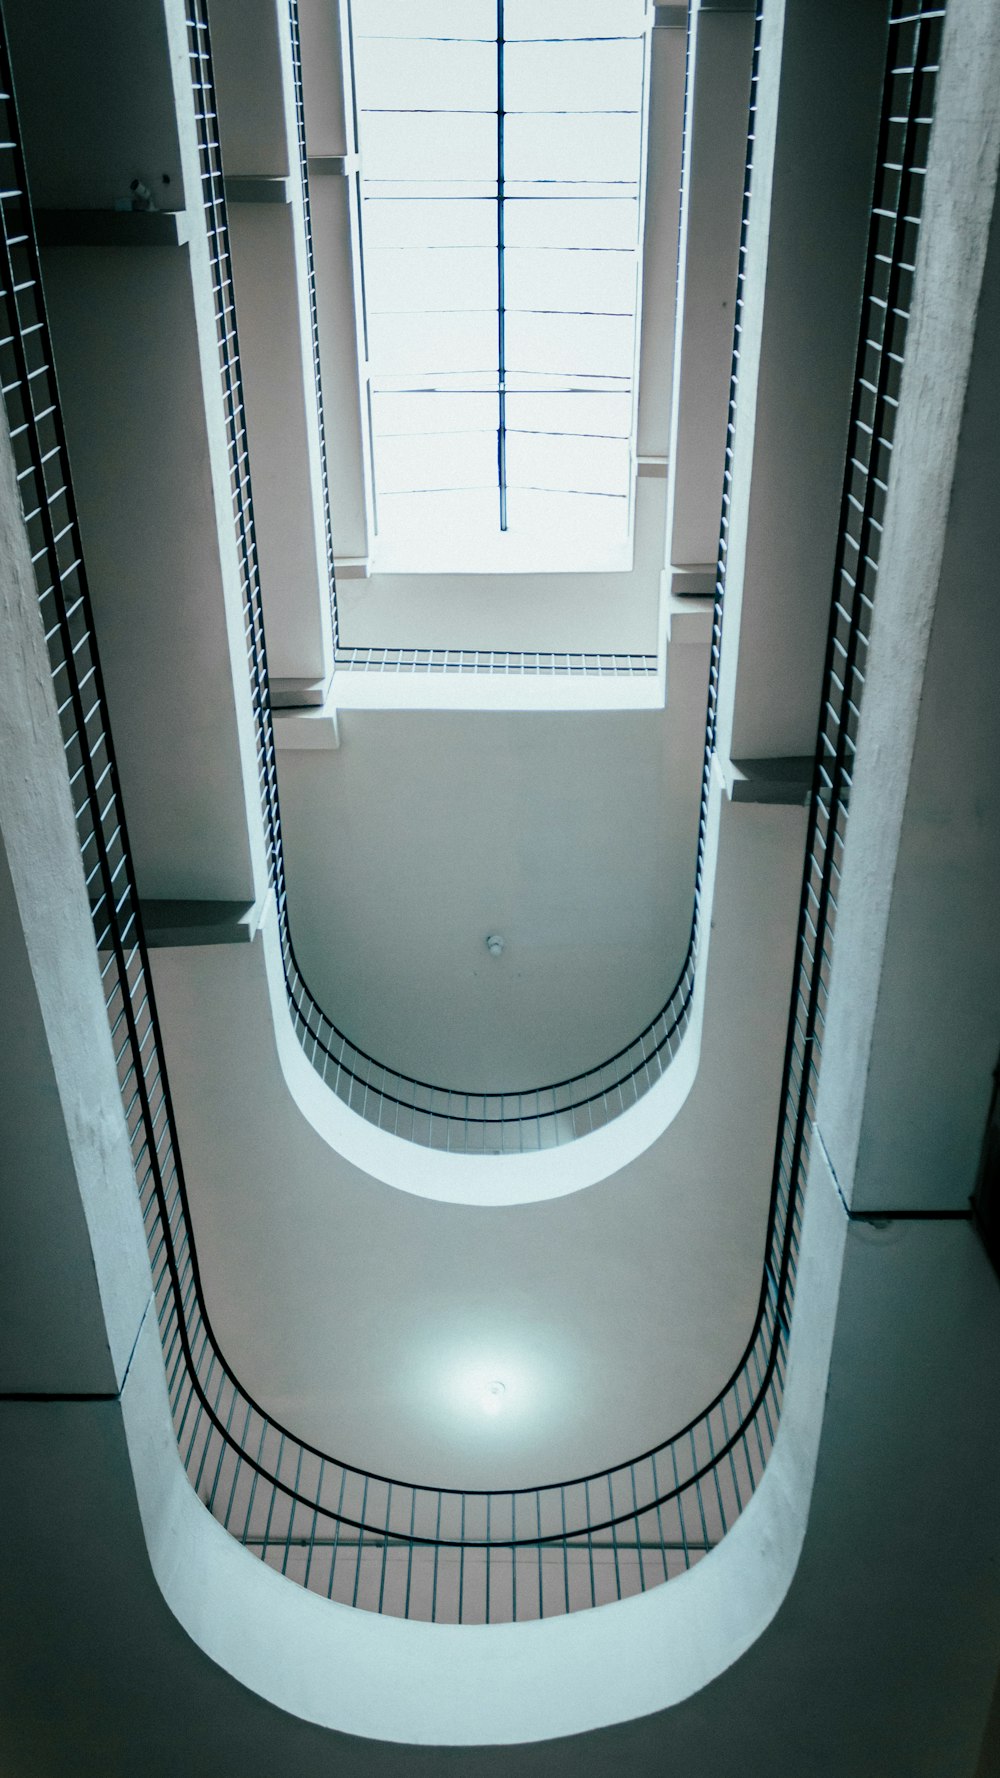 a spiral staircase in a building with a window